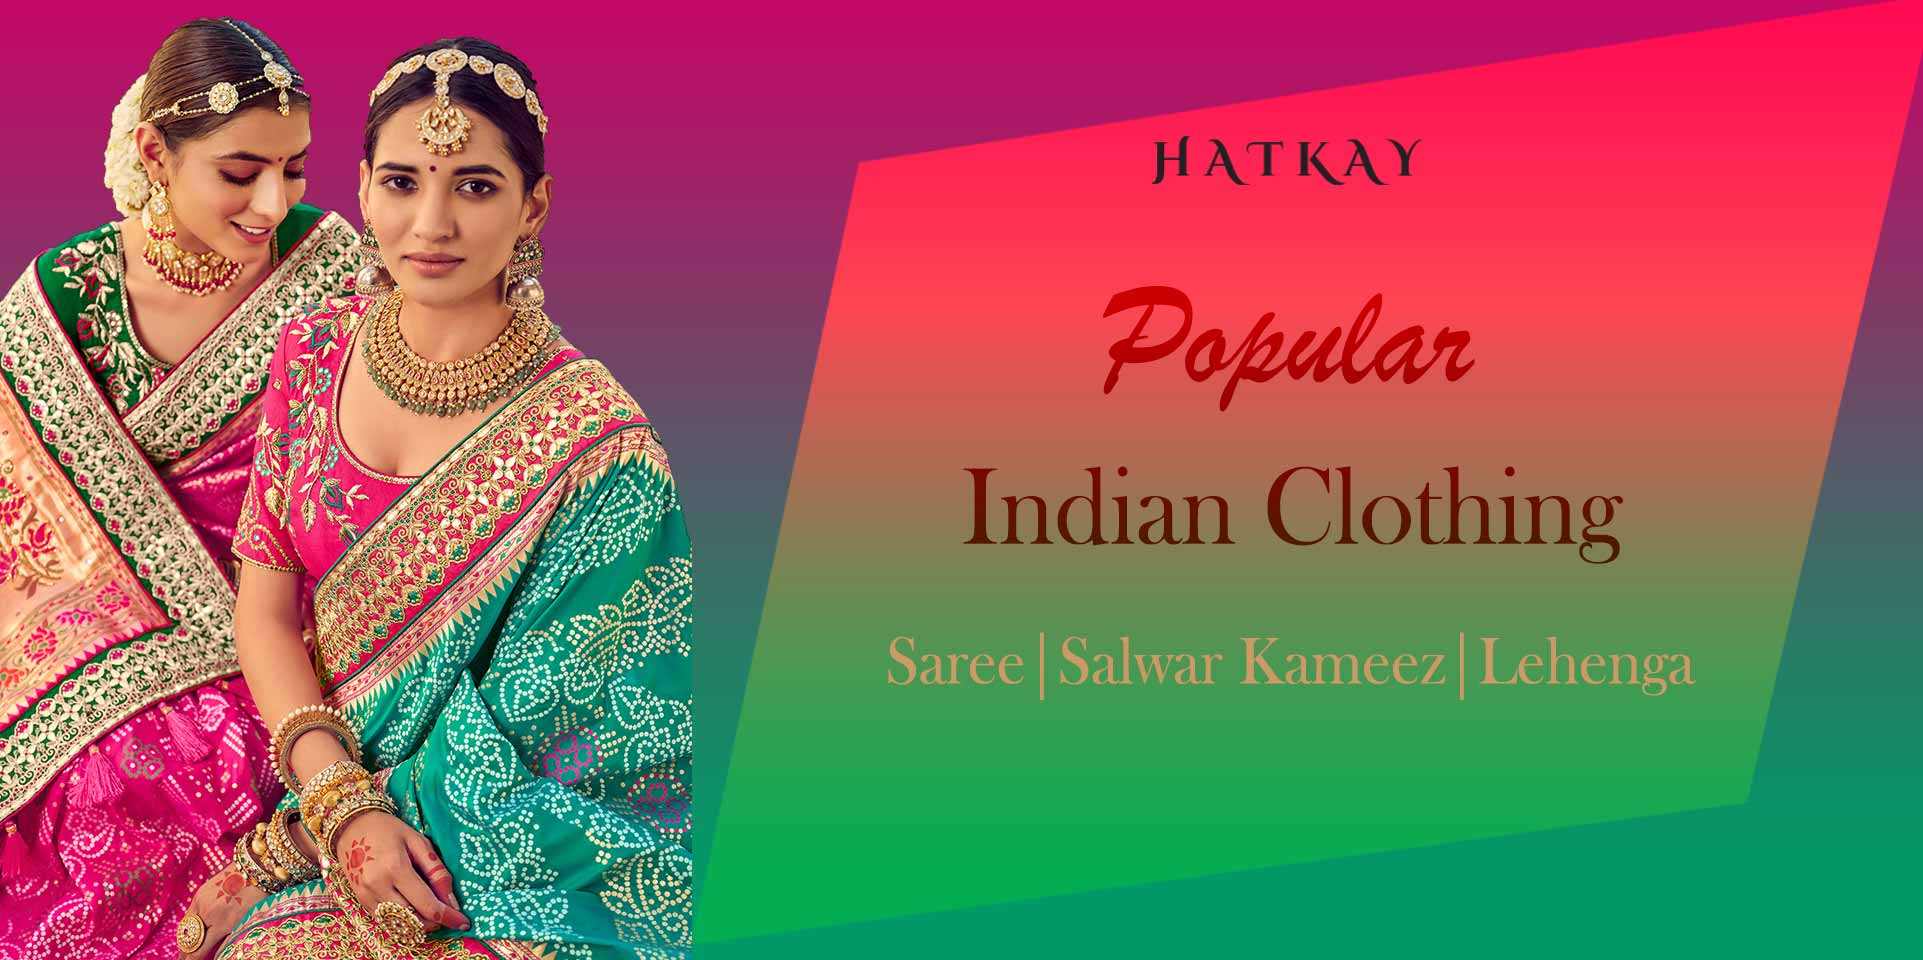 Why is Indian Clothing Popular?